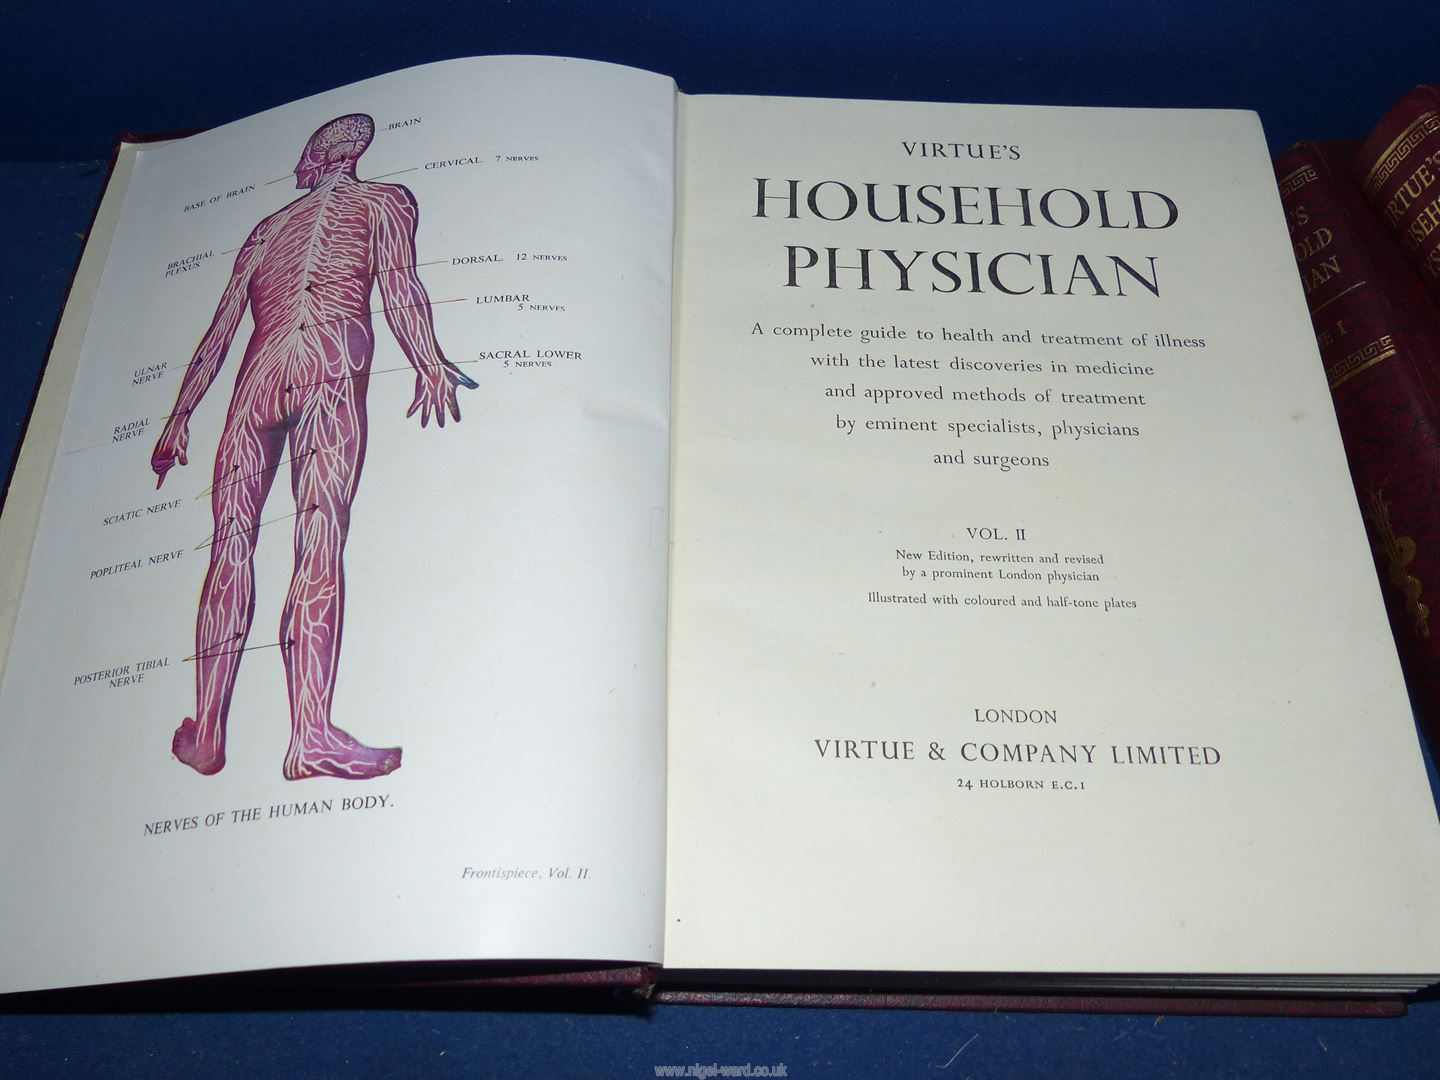 Three volumes of Virtue's Household Physician by H. K. Wagner published by Virtue & Company. - Image 2 of 3